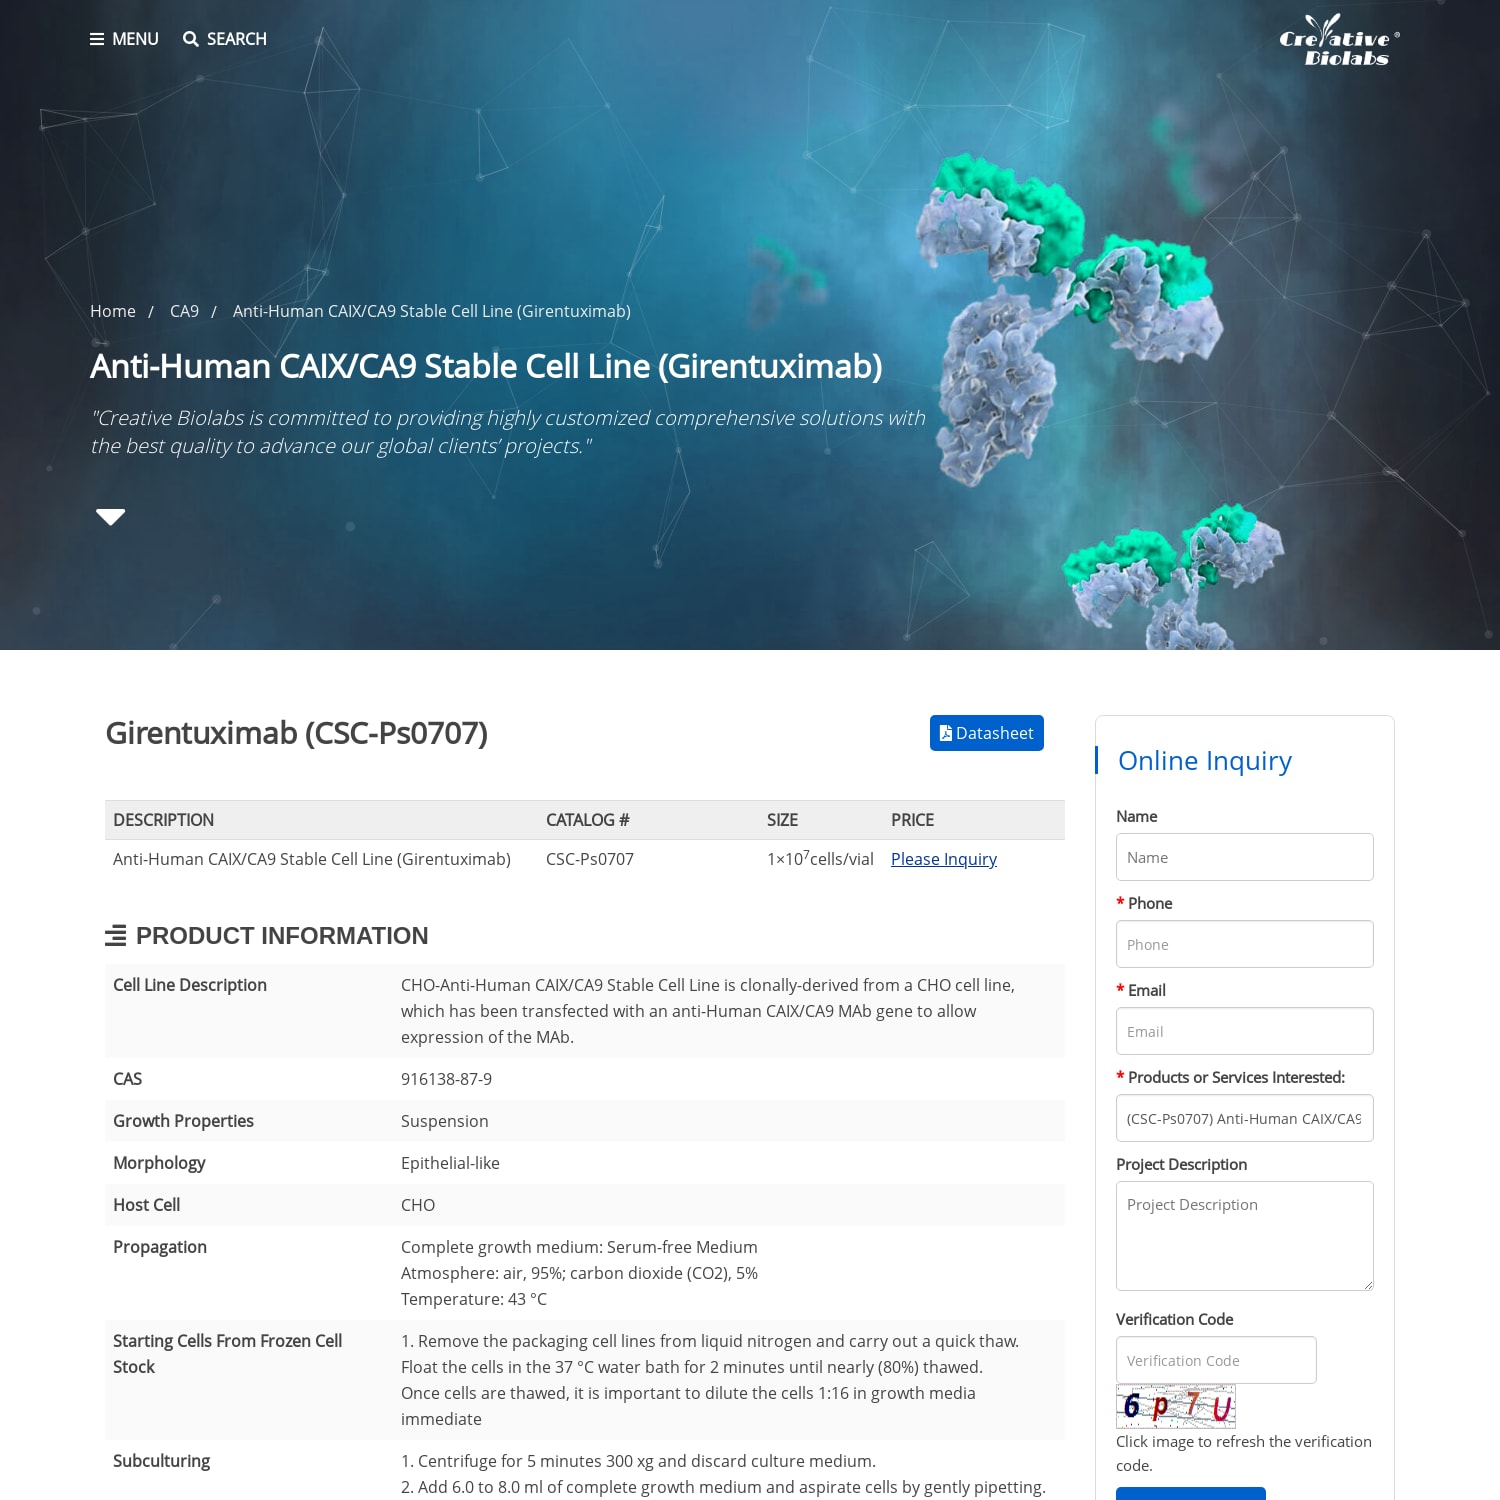 Anti-Human CAIX/CA9 Stable Cell Line (Girentuximab), Girentuximab - Creative Biolabs